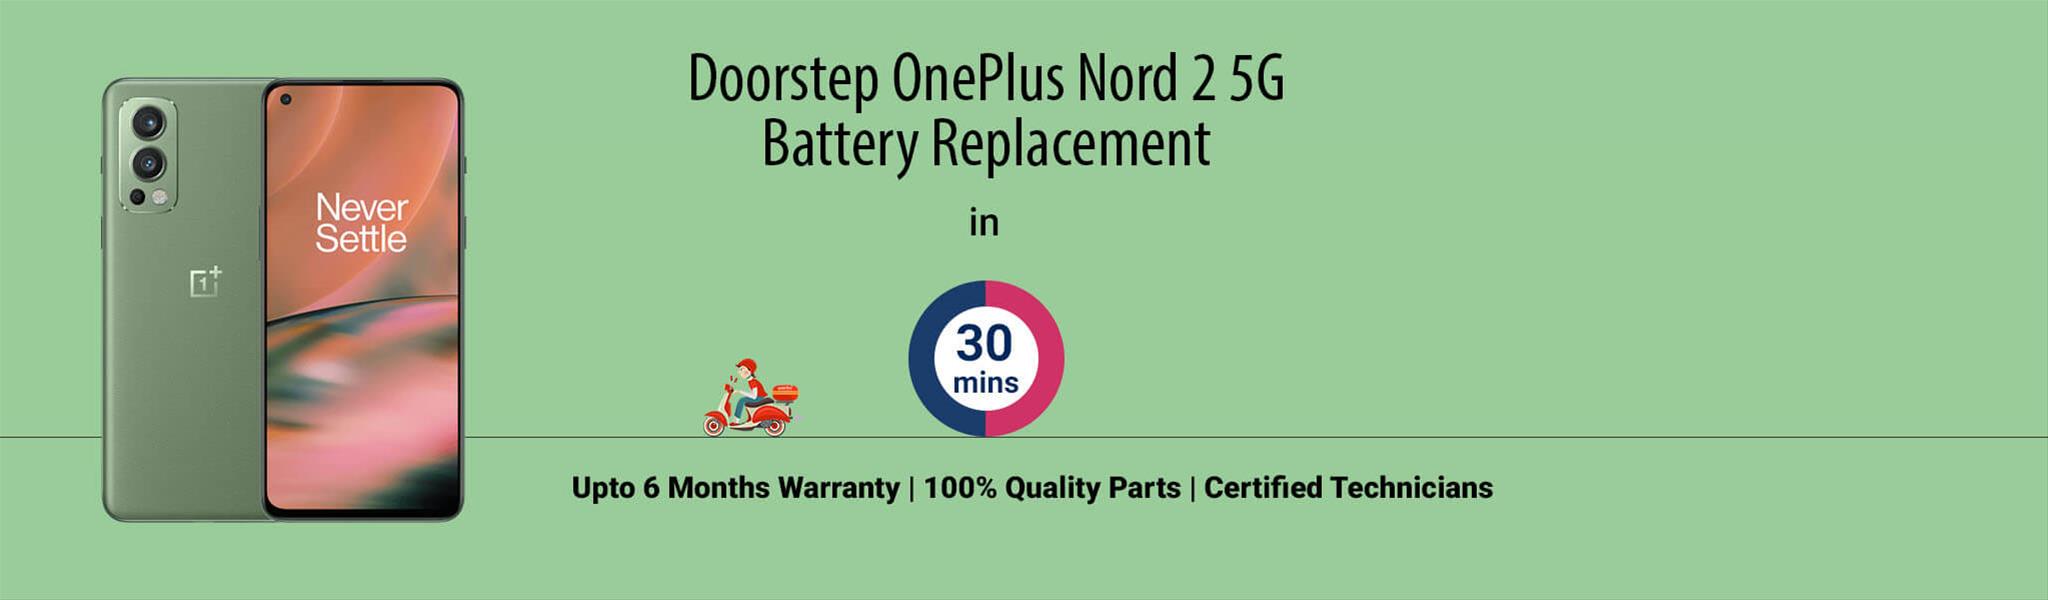 oneplus-nord-2-5g-battery-replacement.jpg